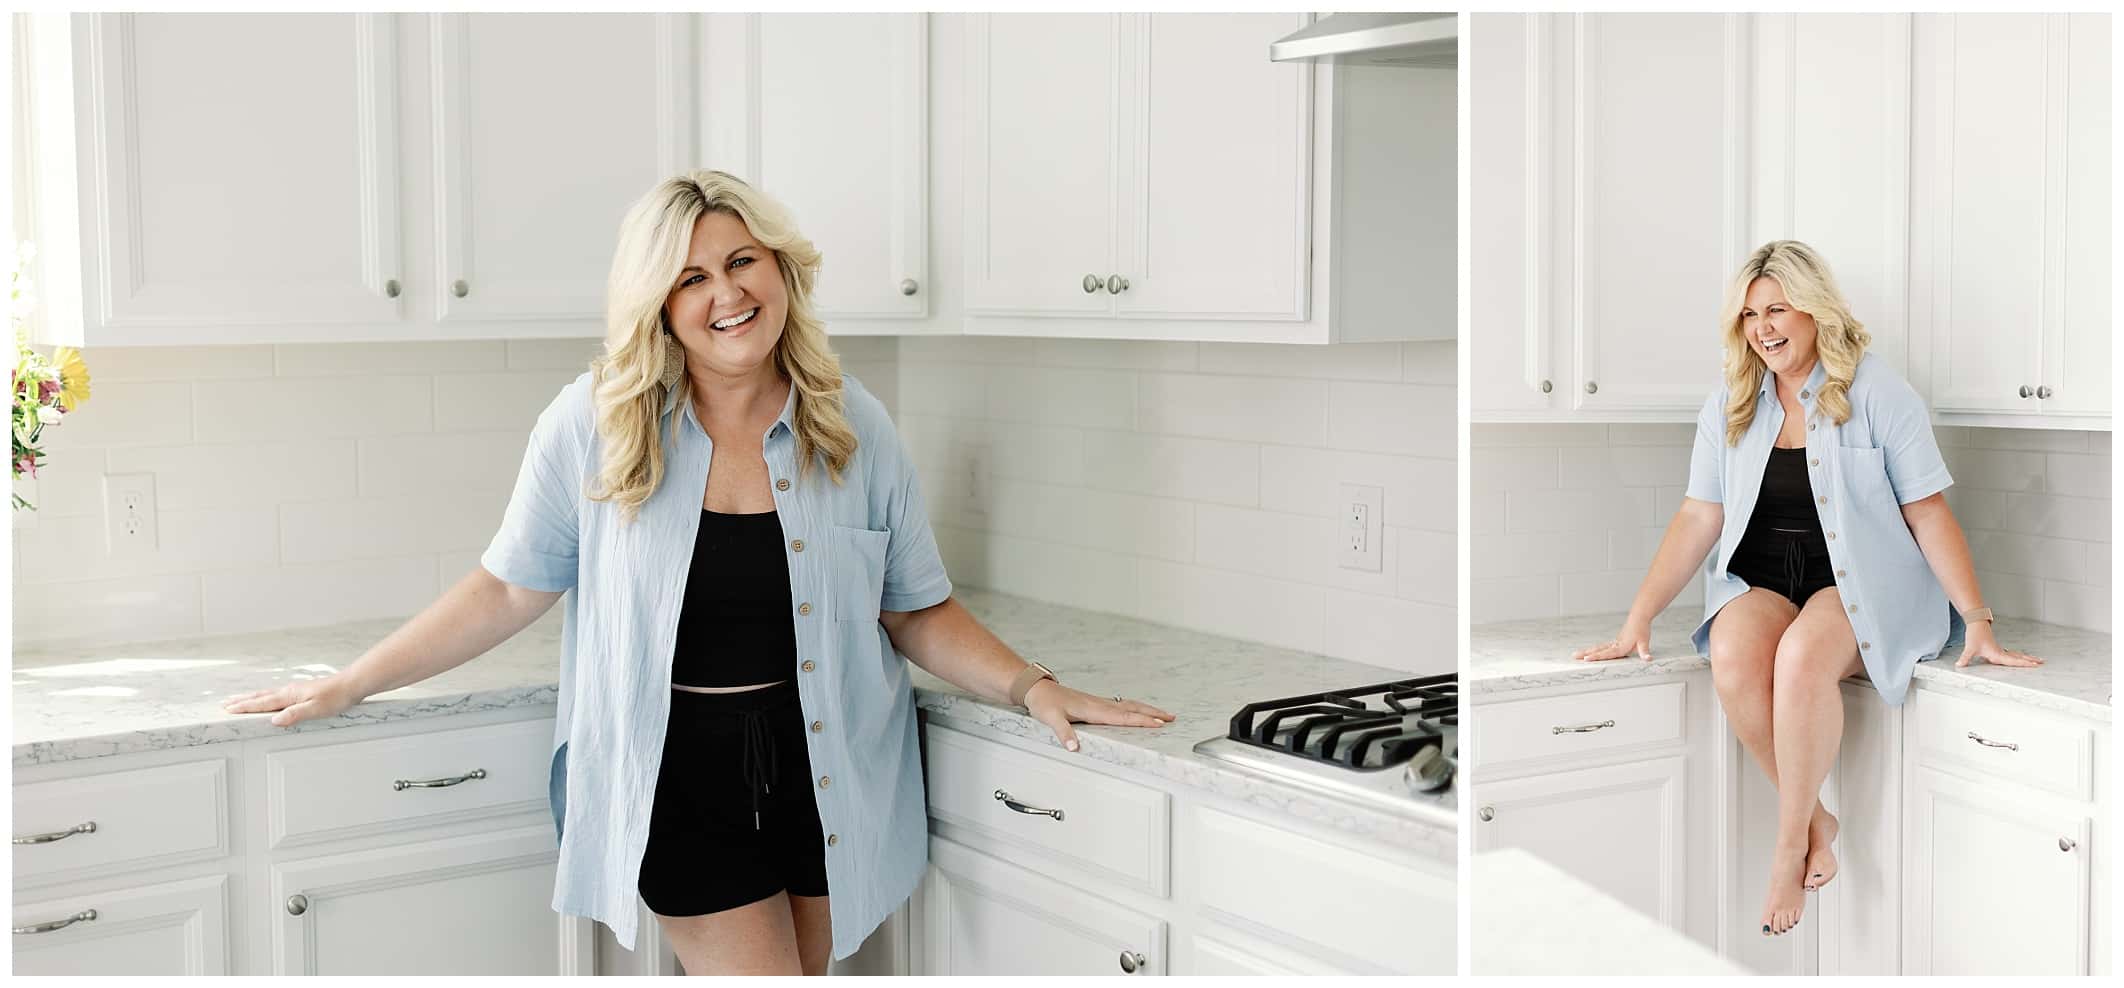 Two pictures of a woman posing in a kitchen.